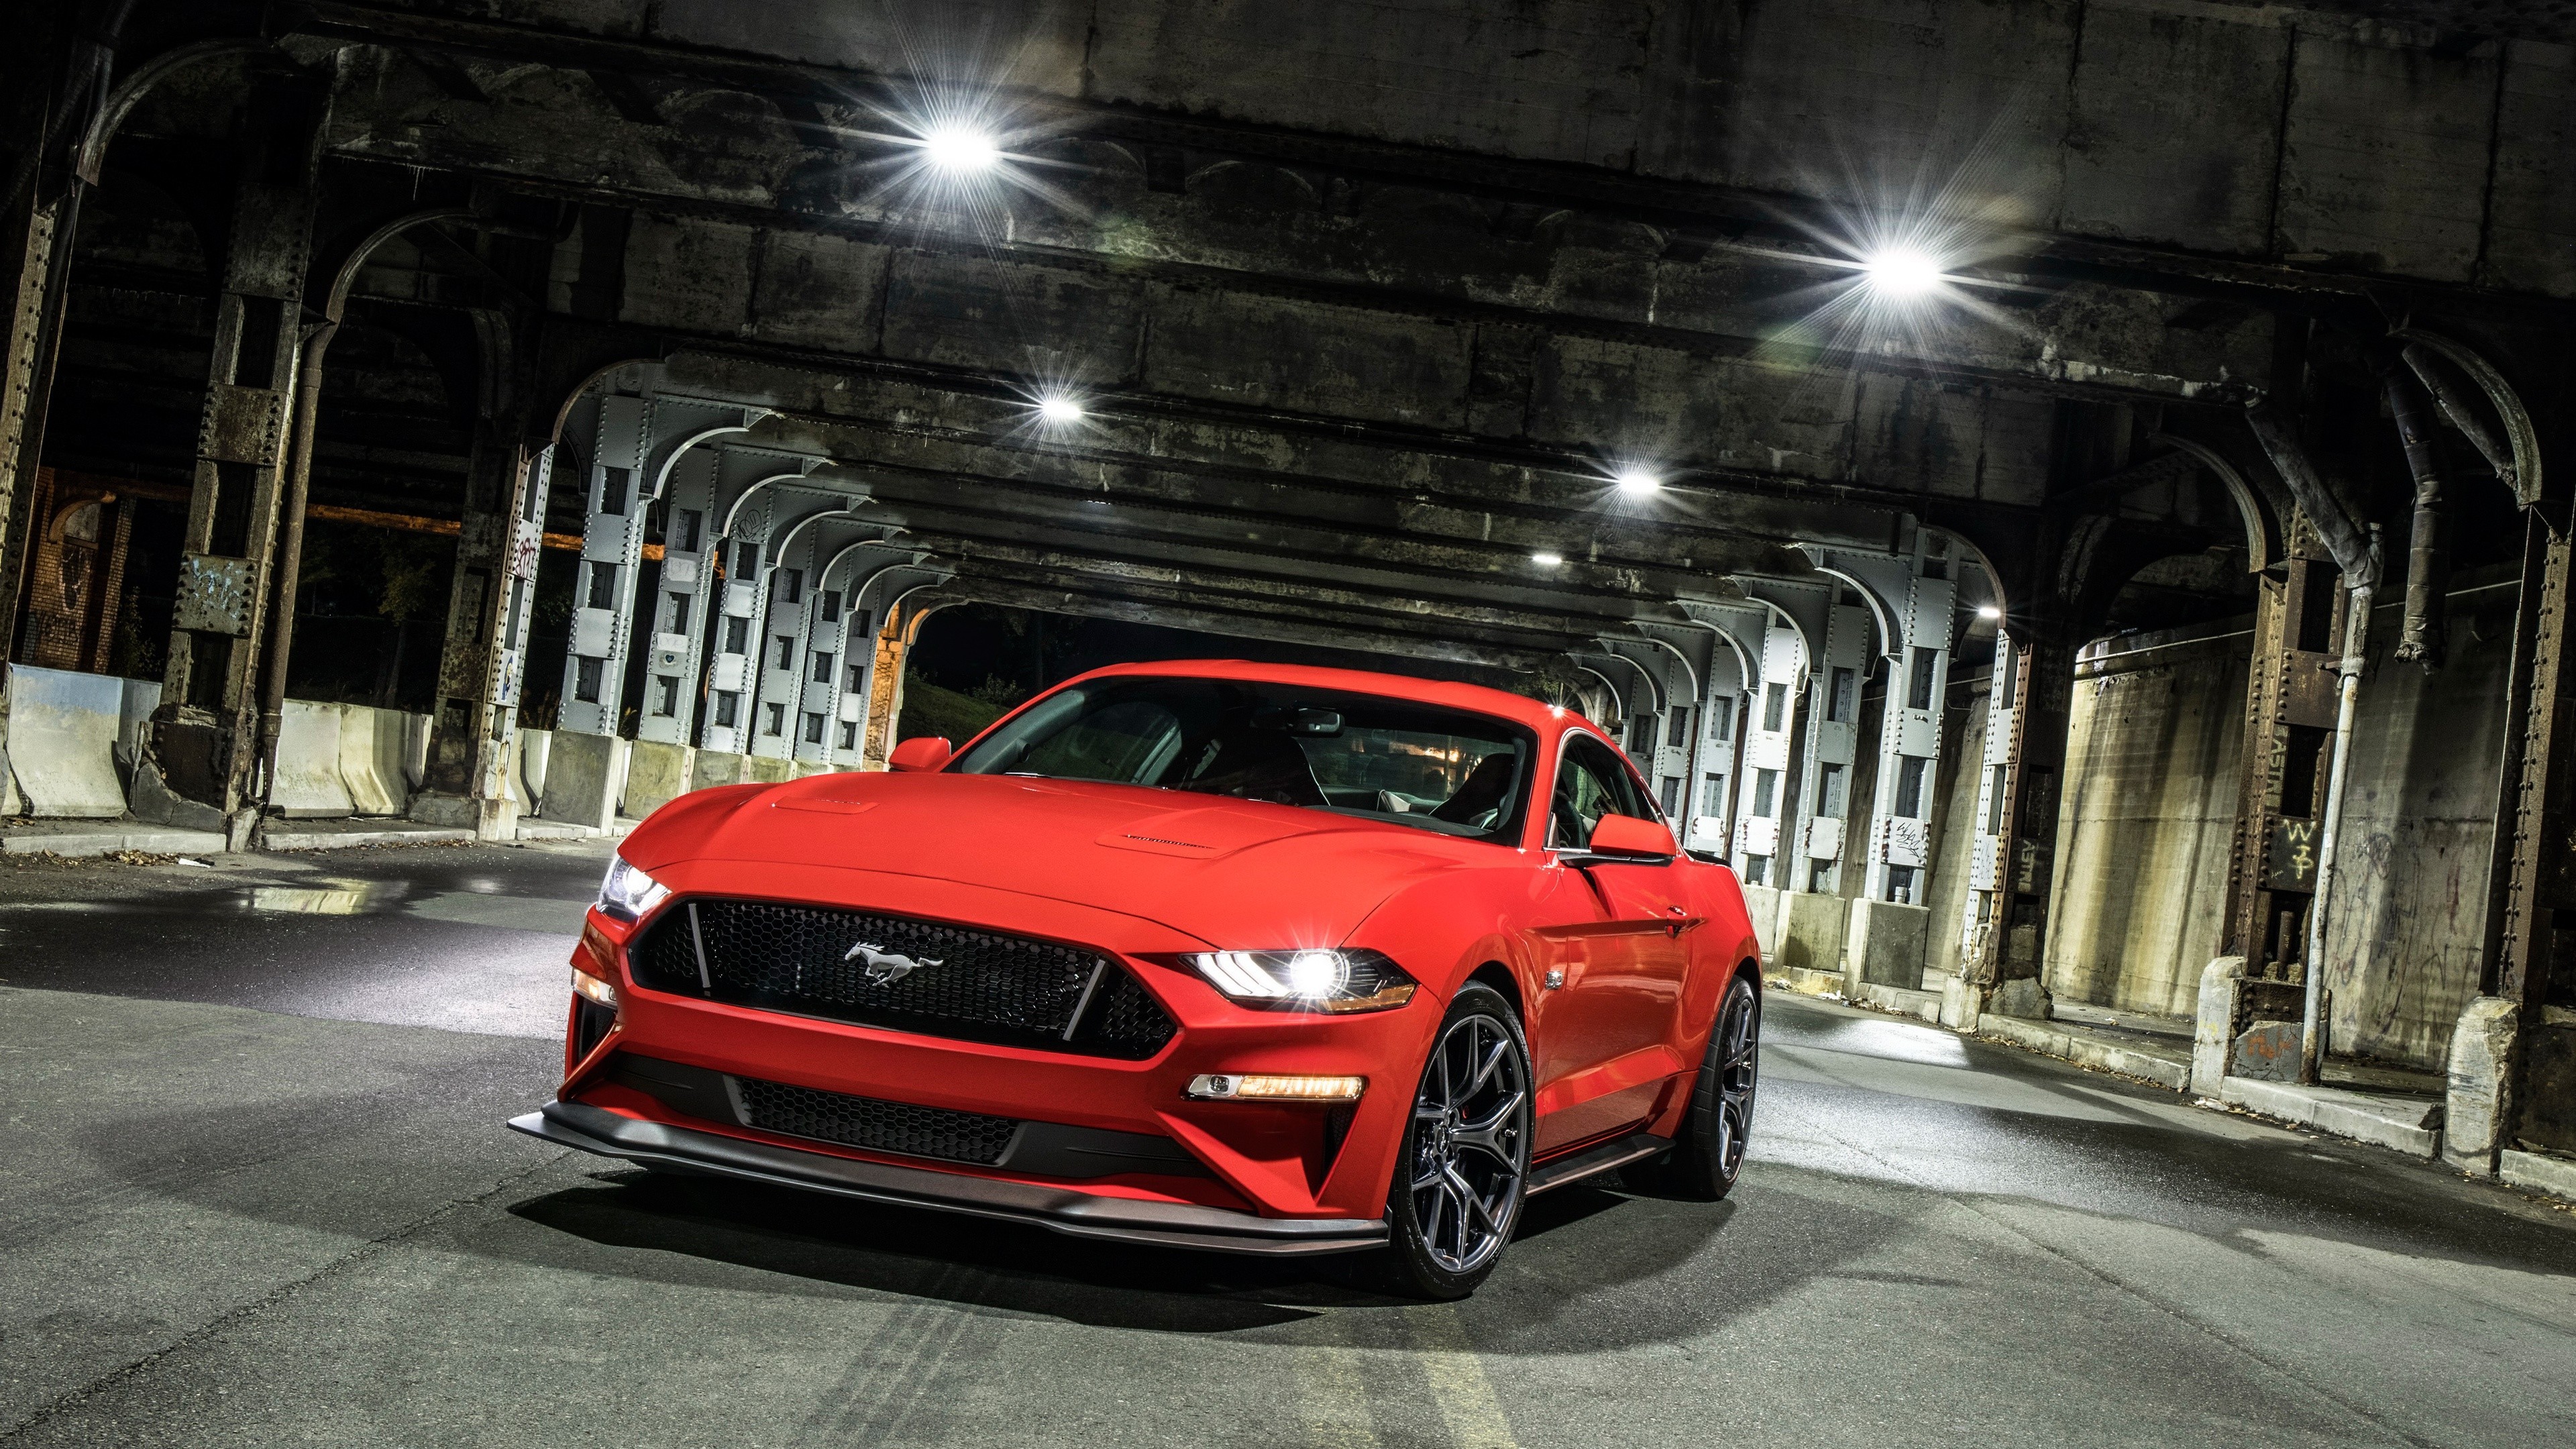 3840x2160  Fahrzeuge - Ford Mustang GT Muscle Car Red Car Autos Fahrzeug  Ford Mustang Ford Wallpaper